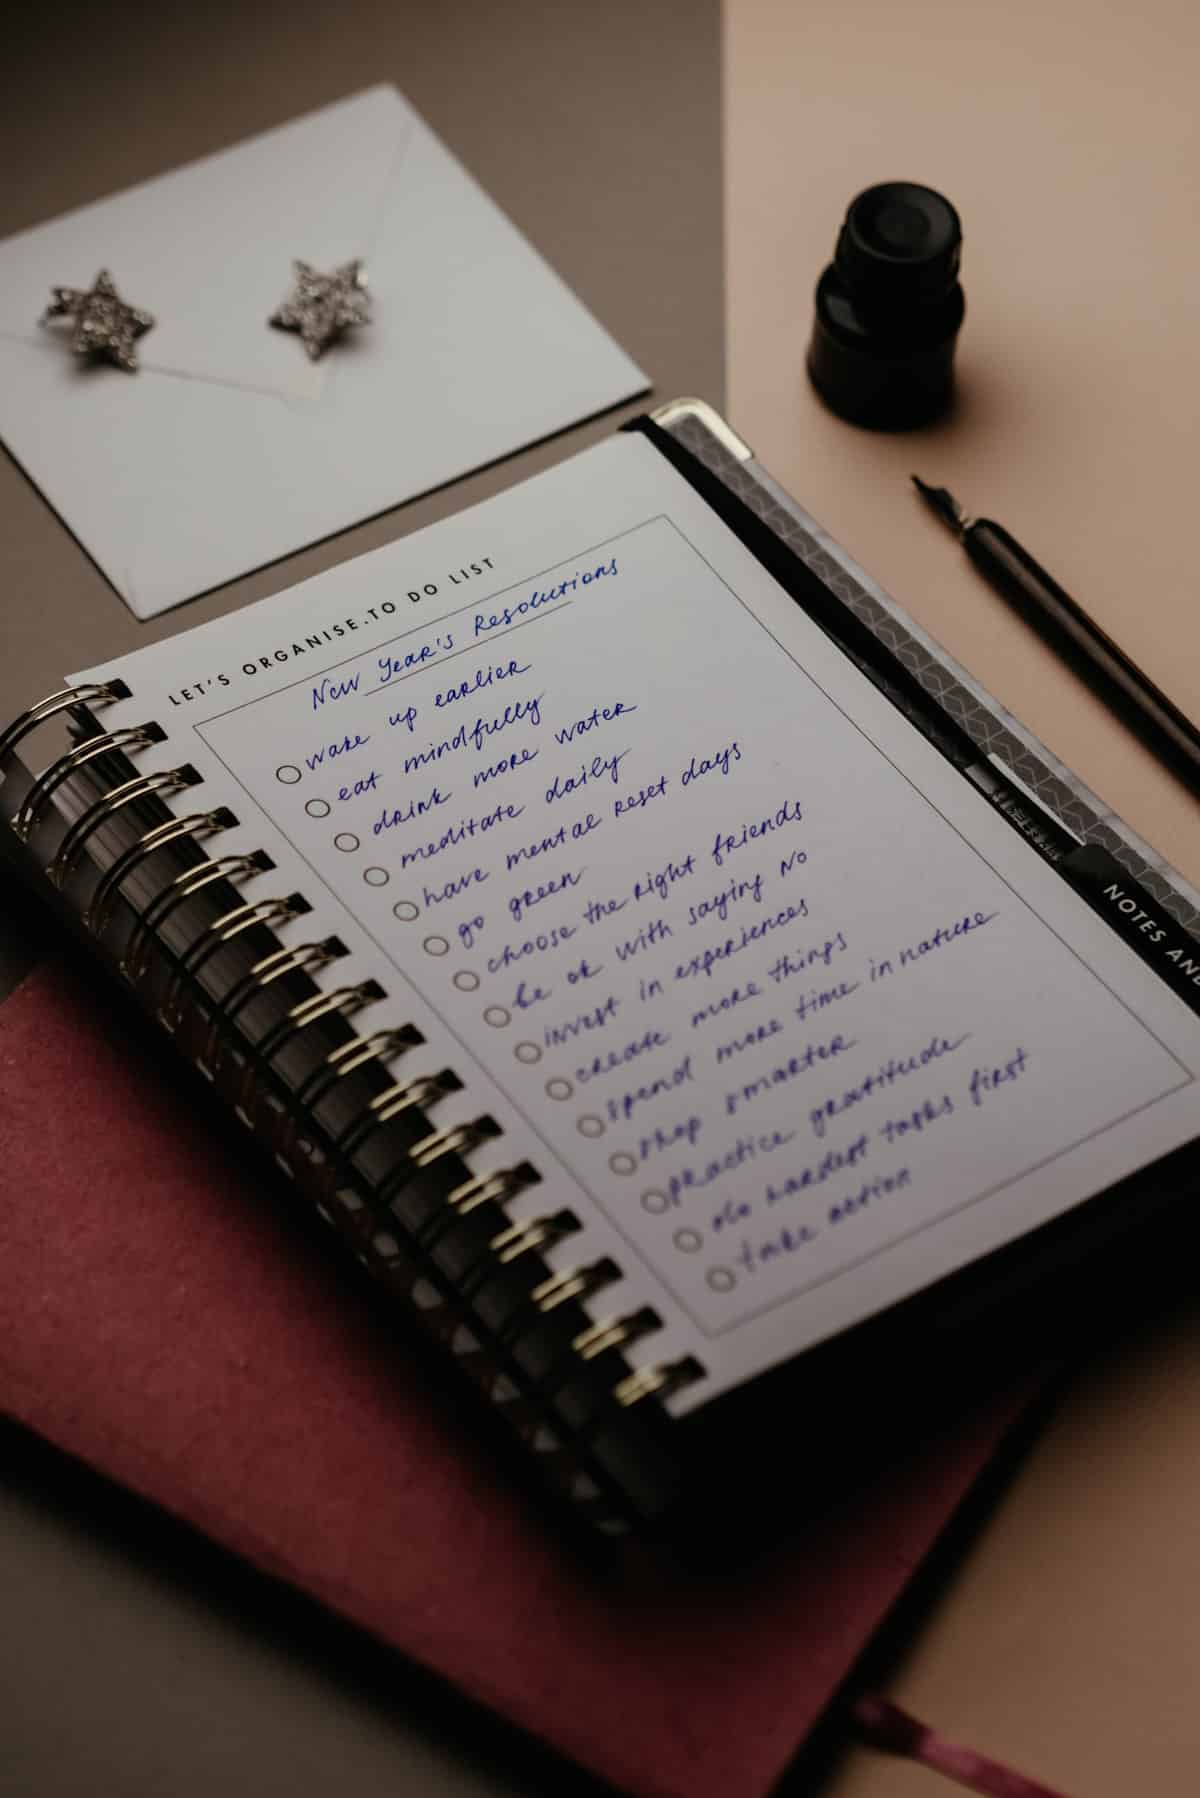 White notebook on a table with a list of New Year's resolutions written in blue ink